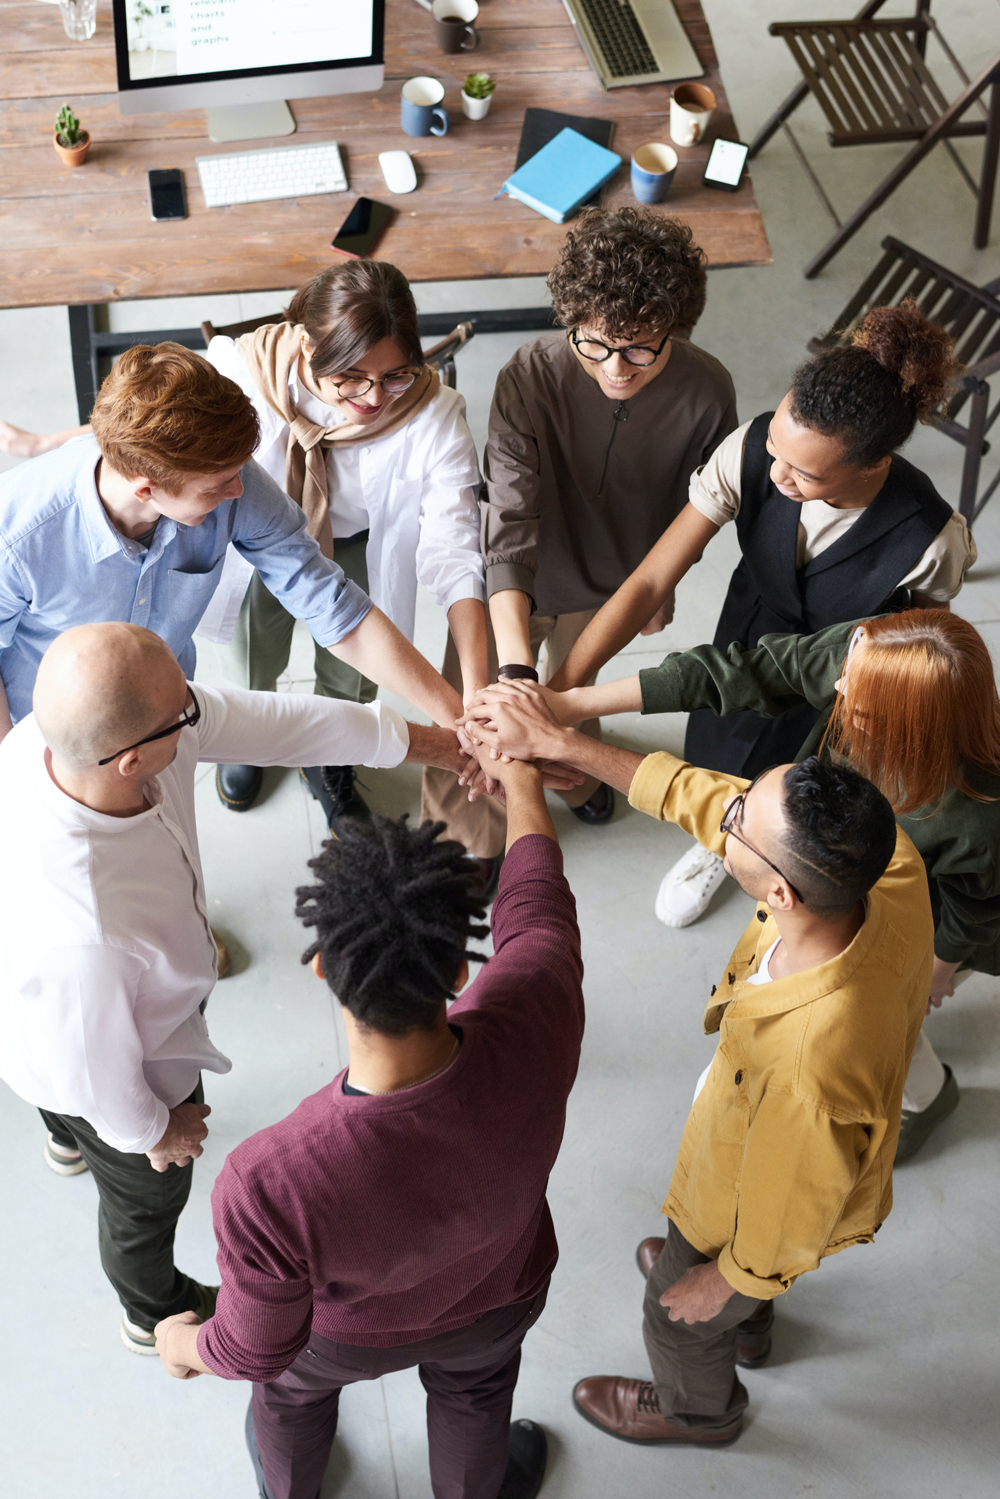 Foster a culture of inclusivity and understanding in your workplace with our Equality and Diversity e-learning course. Empower your team and promote positive change. Enroll now to get started.